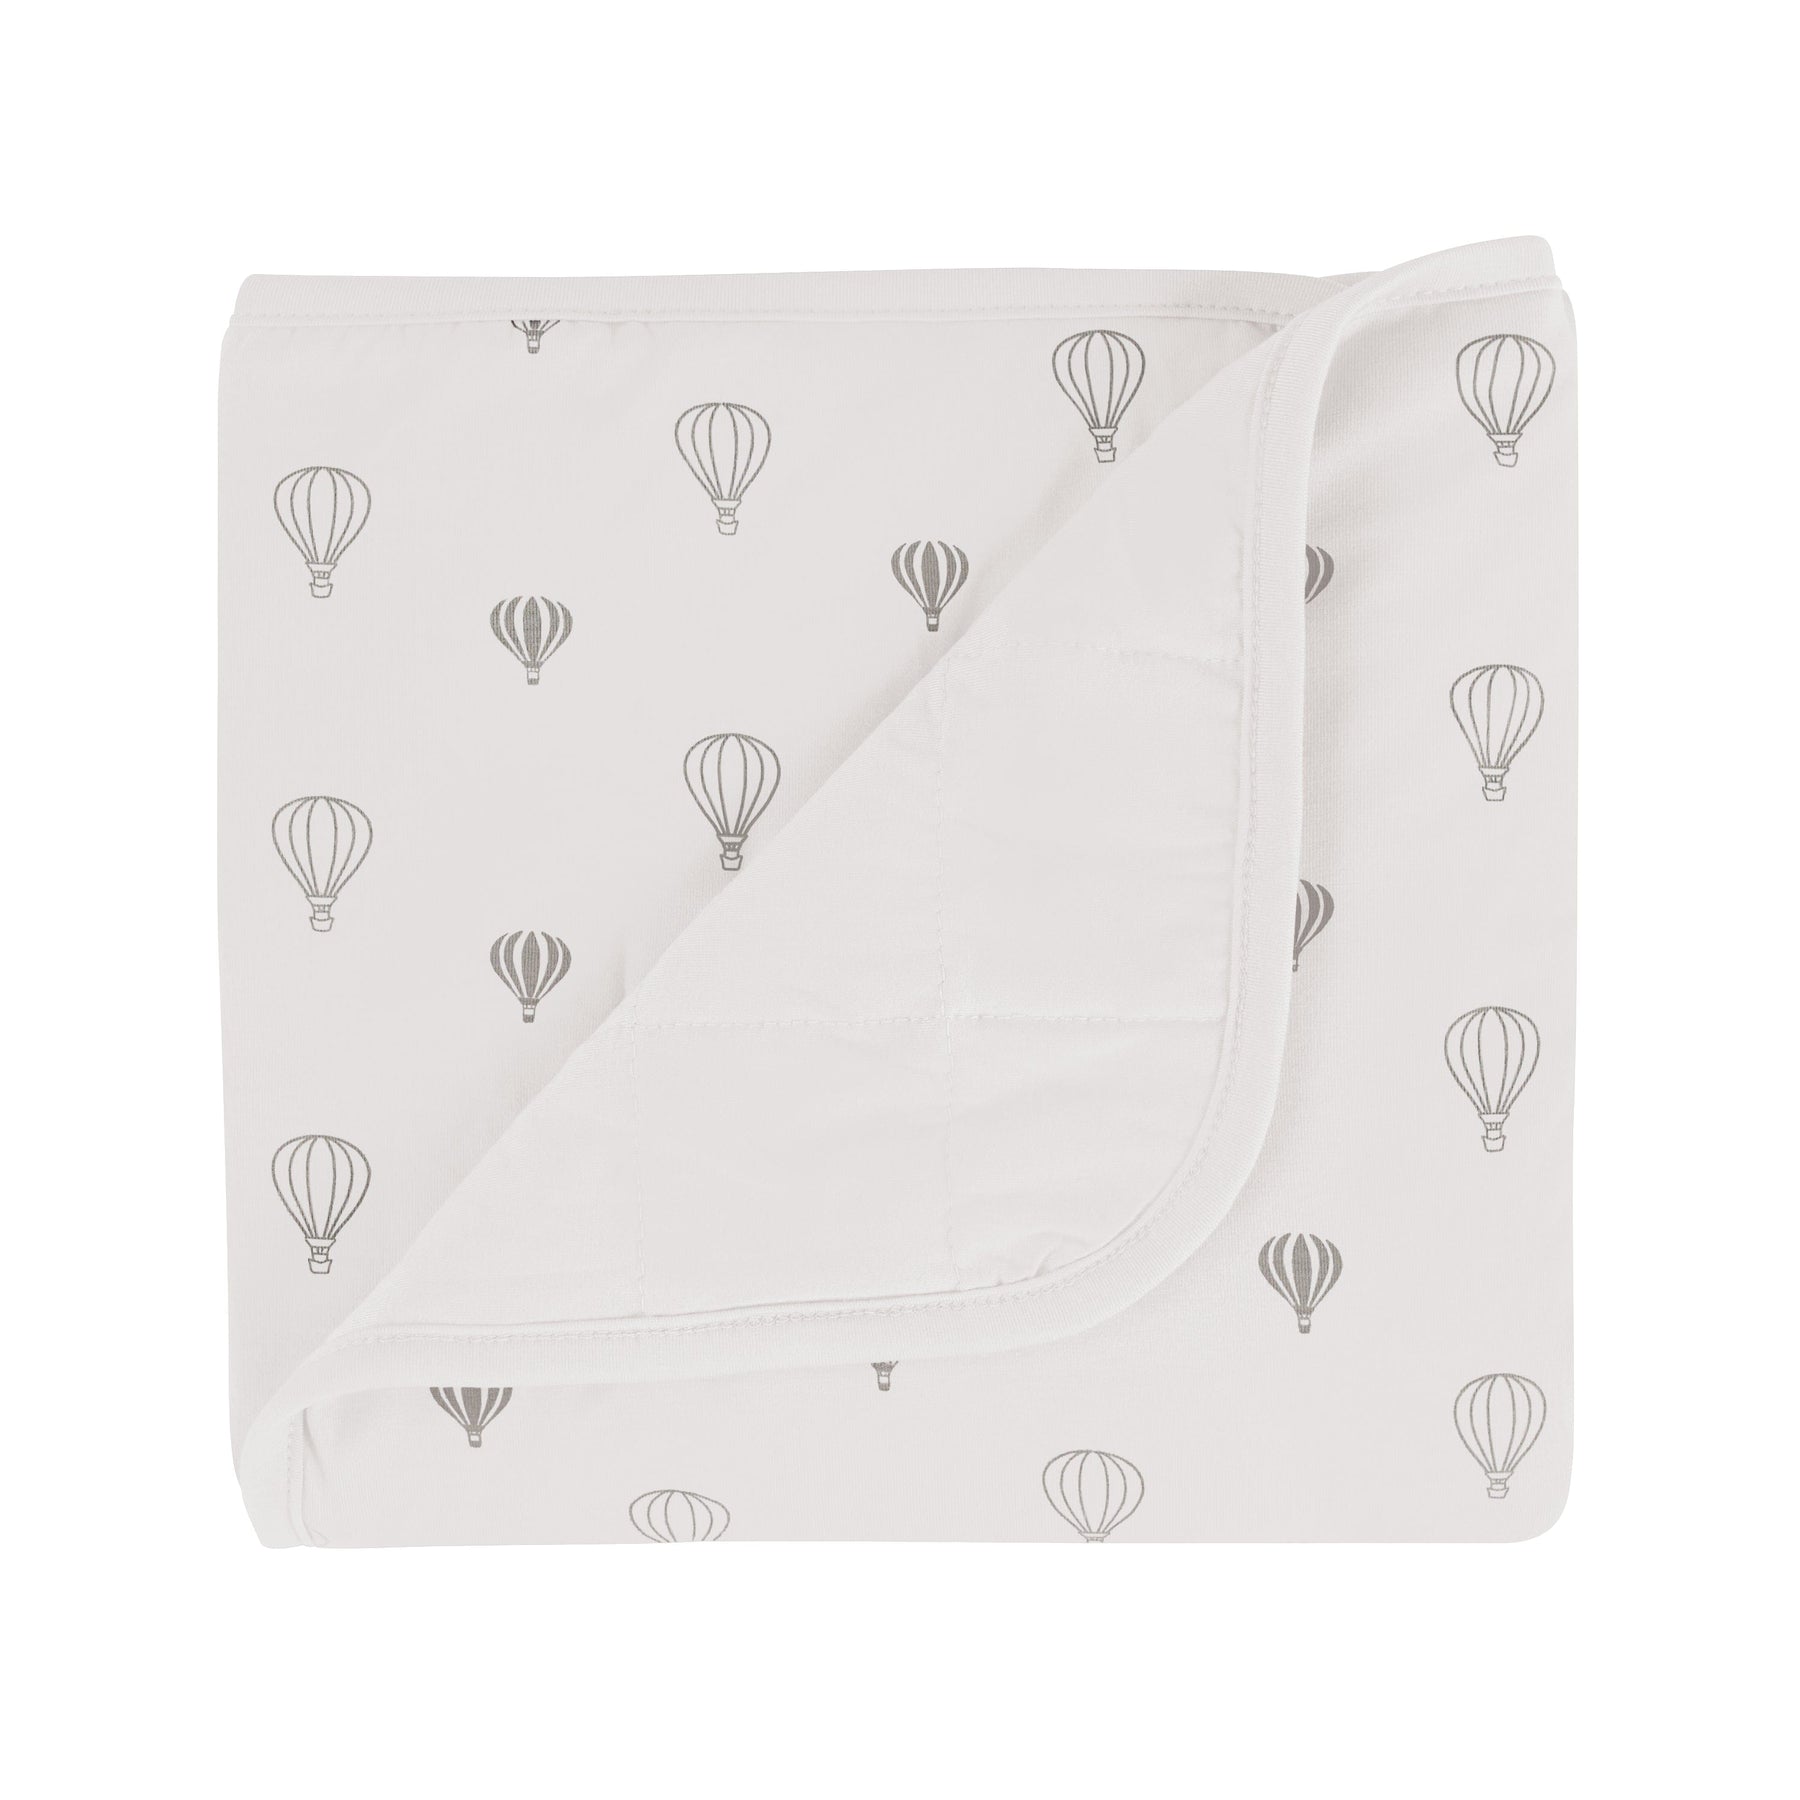 Kyte Baby Baby Blanket Hot Air Balloon / Infant Baby Blanket in Hot Air Balloon